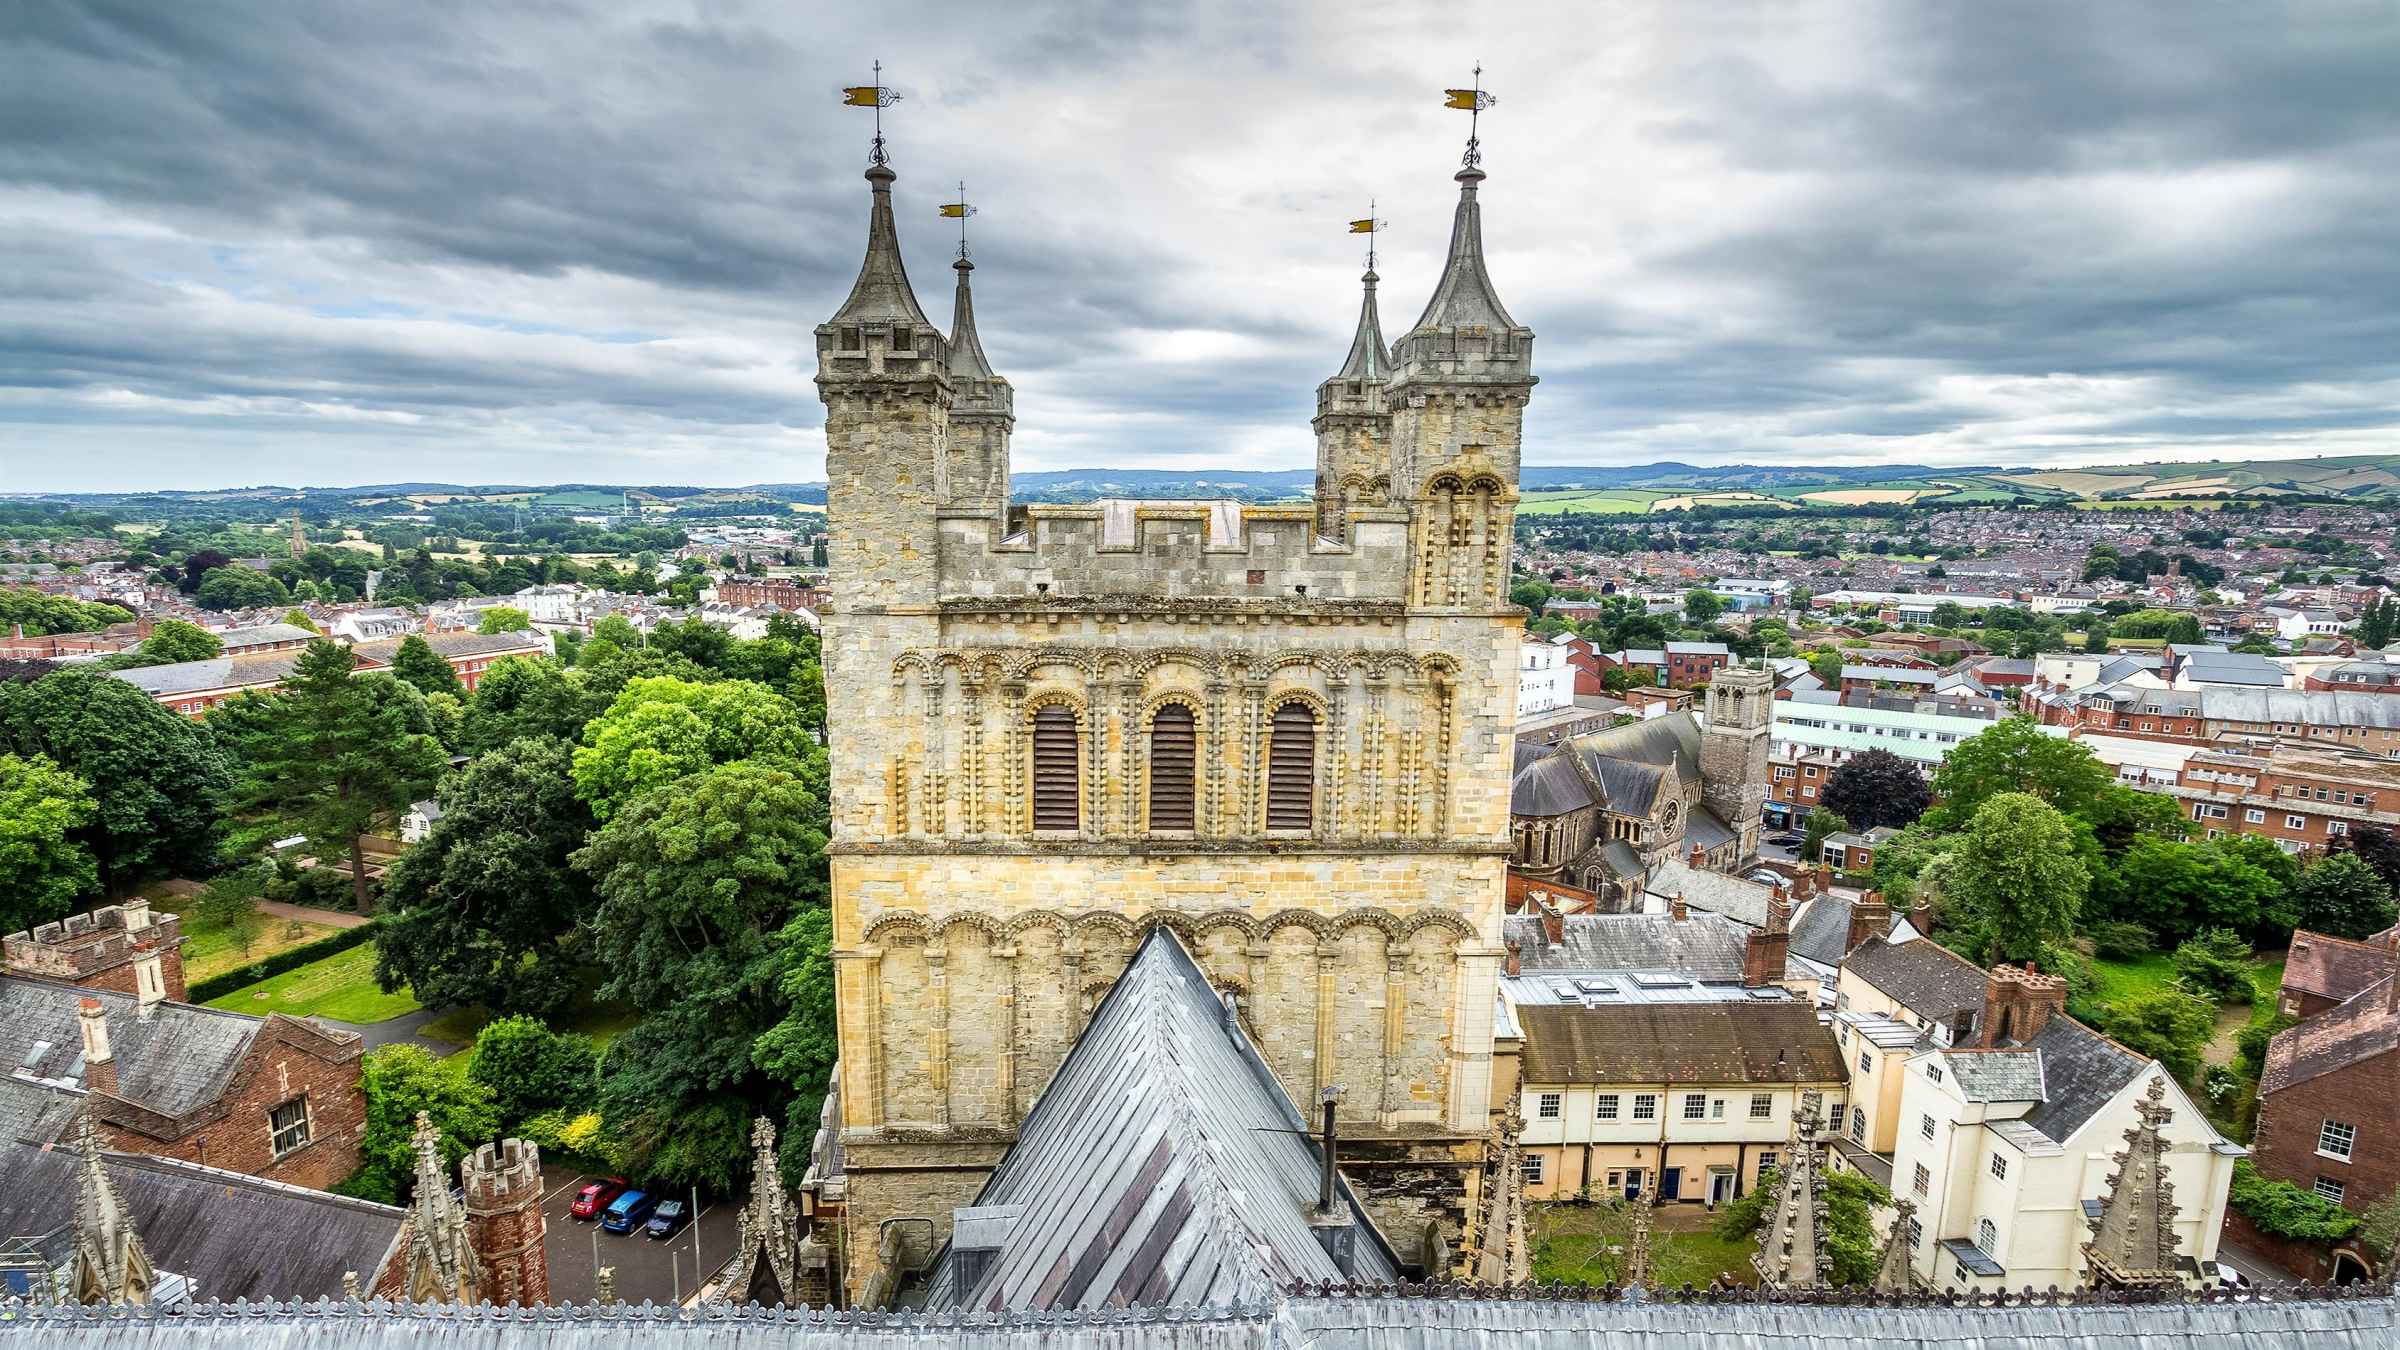 The BEST Exeter Tours and Things to Do in 2022 - FREE Cancellation